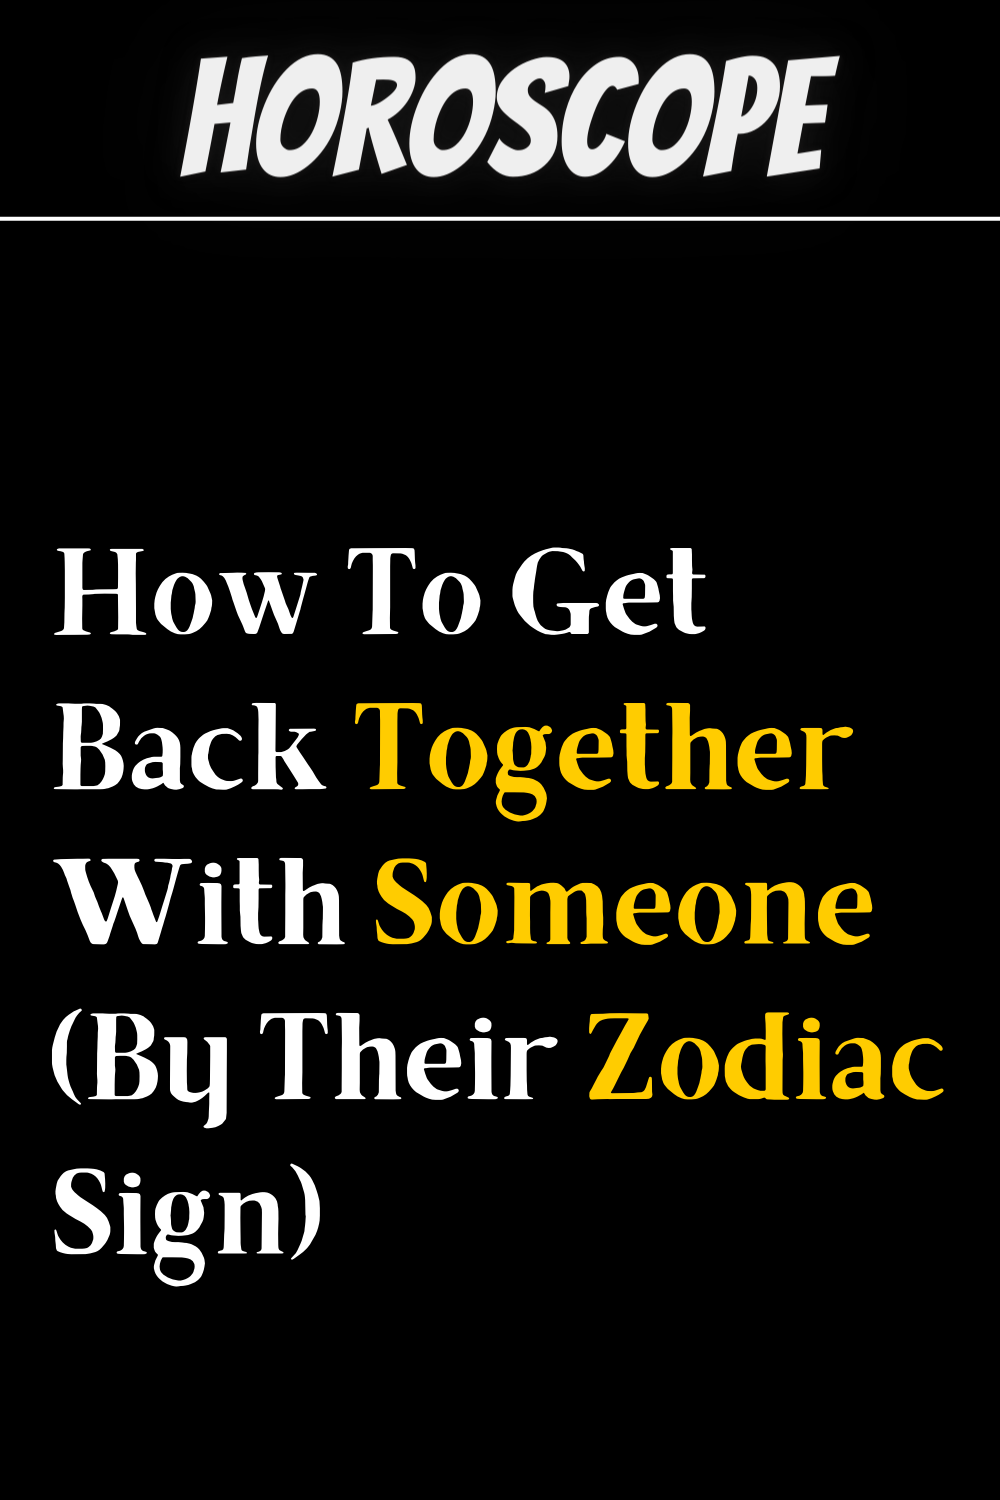 How To Get Back Together With Someone (By Their Zodiac Sign)